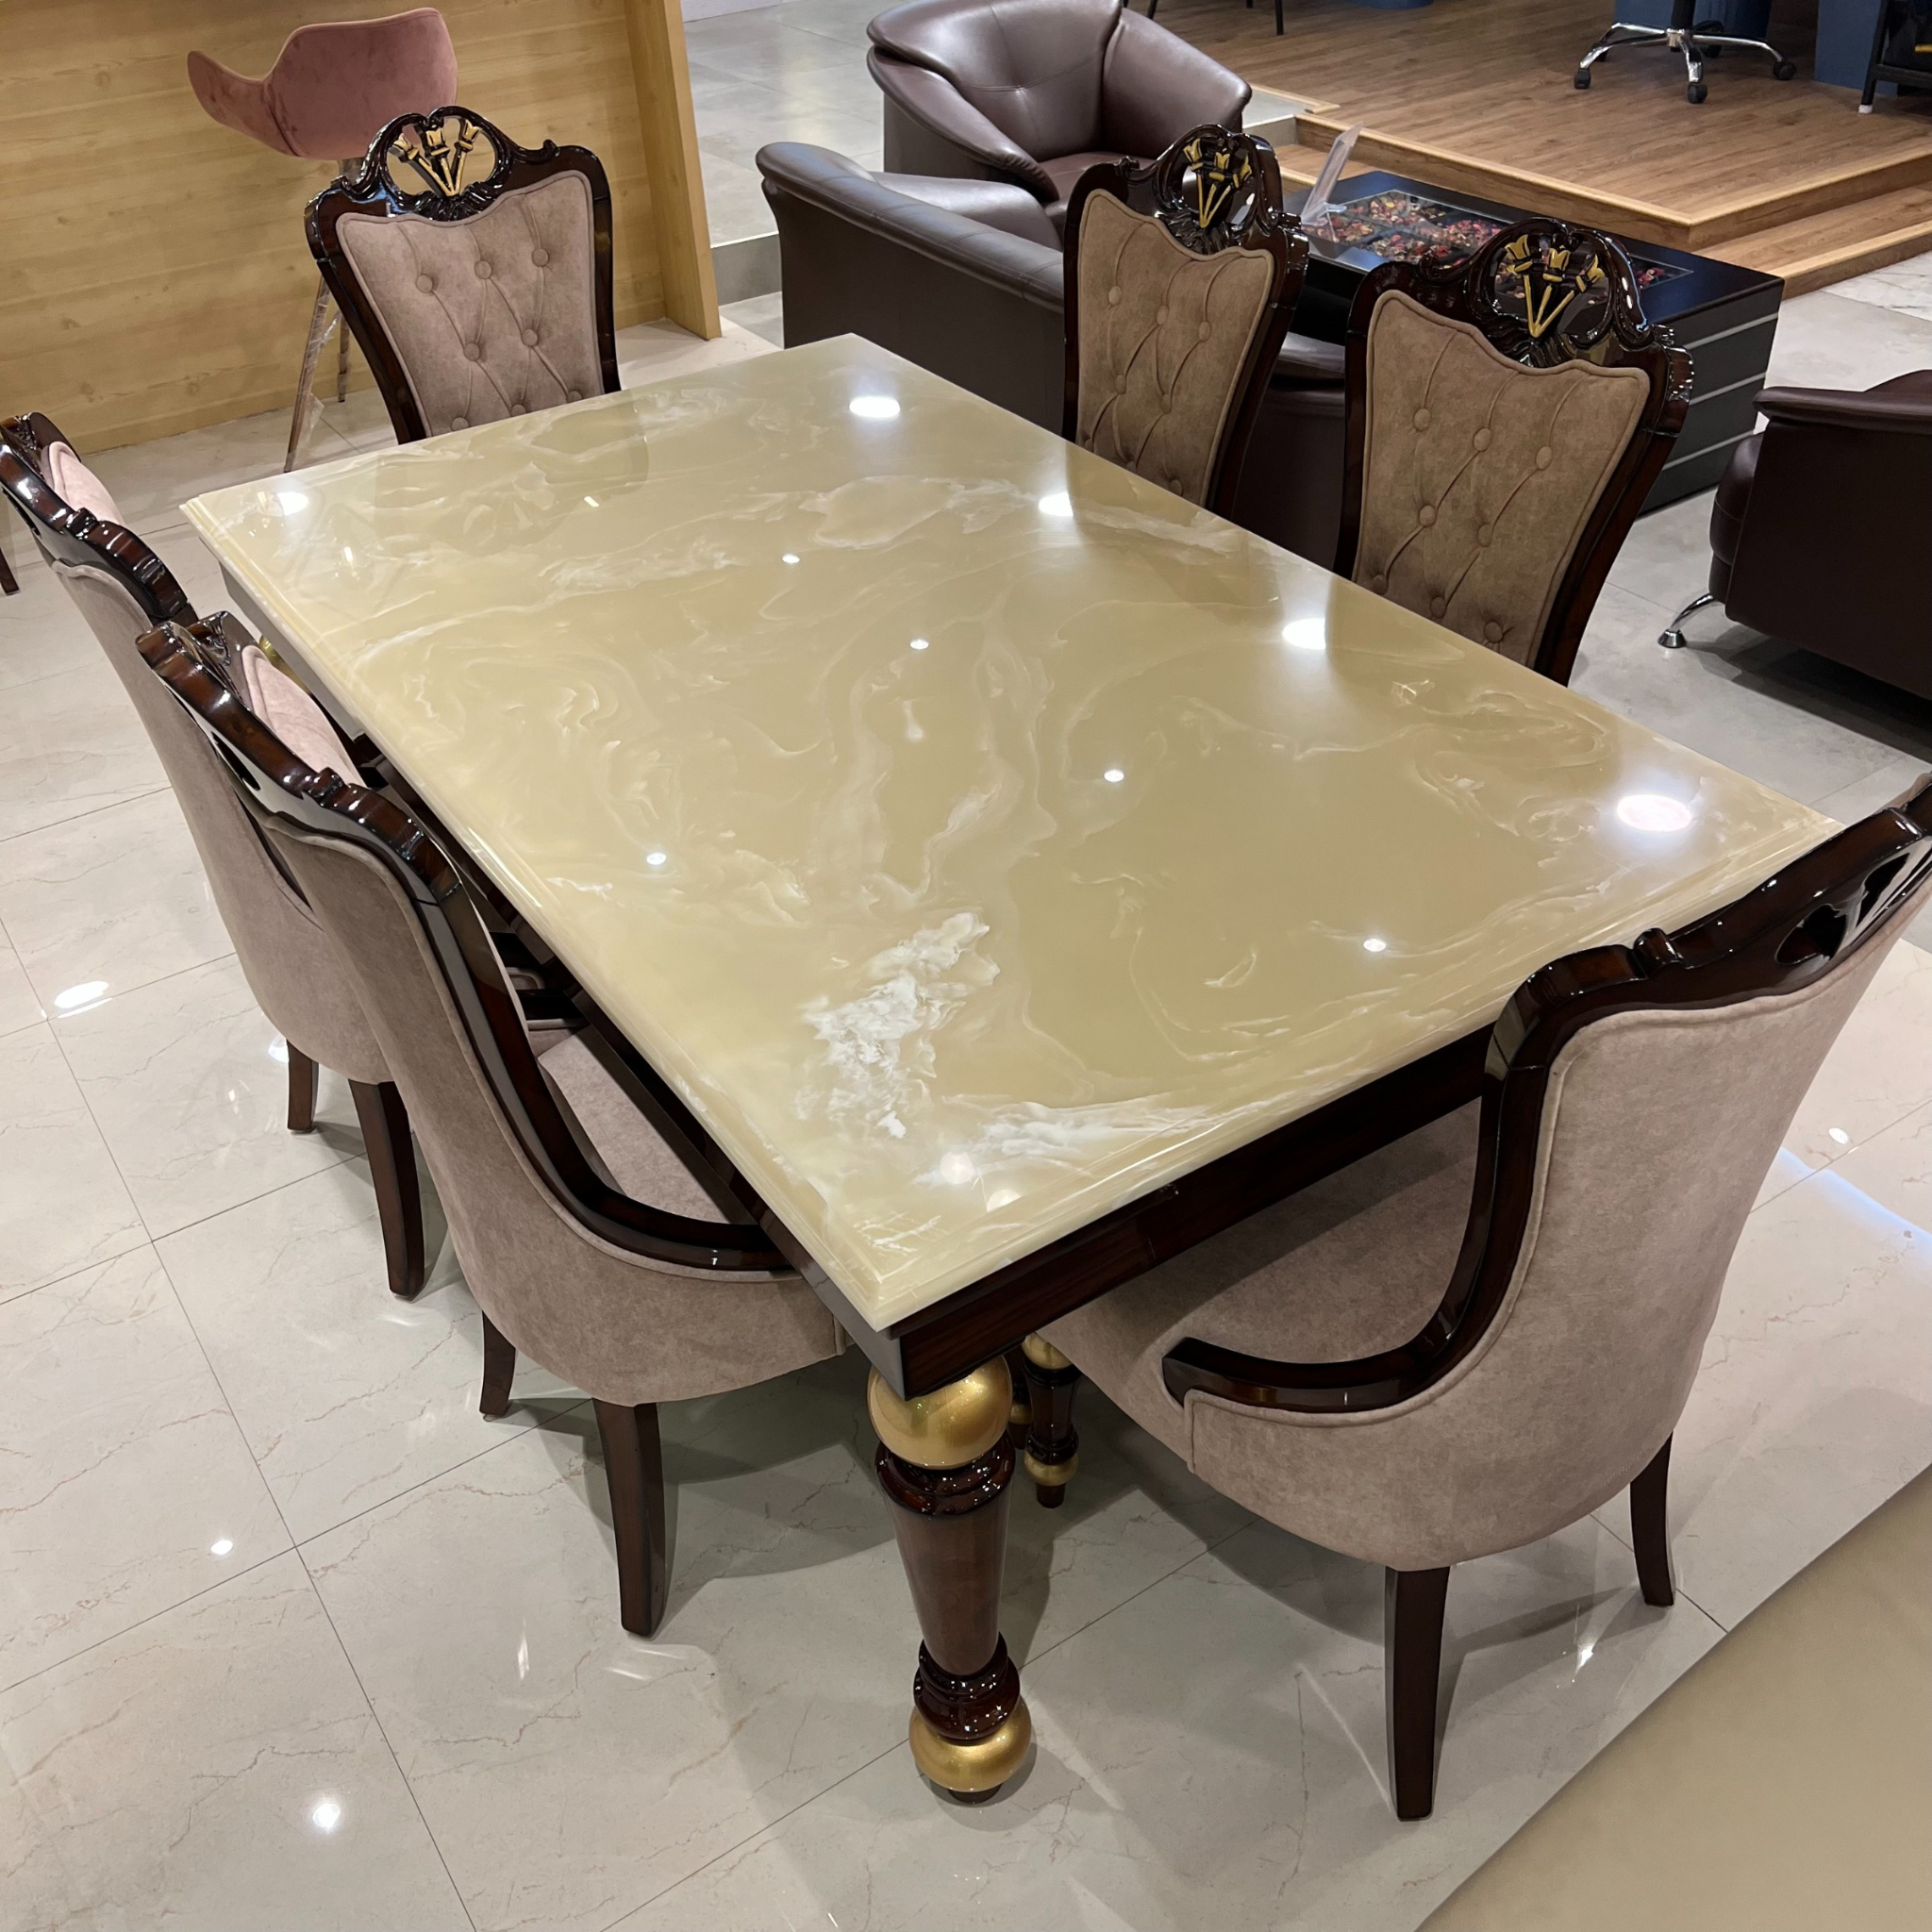 Golden Rose Dining Table with Chair